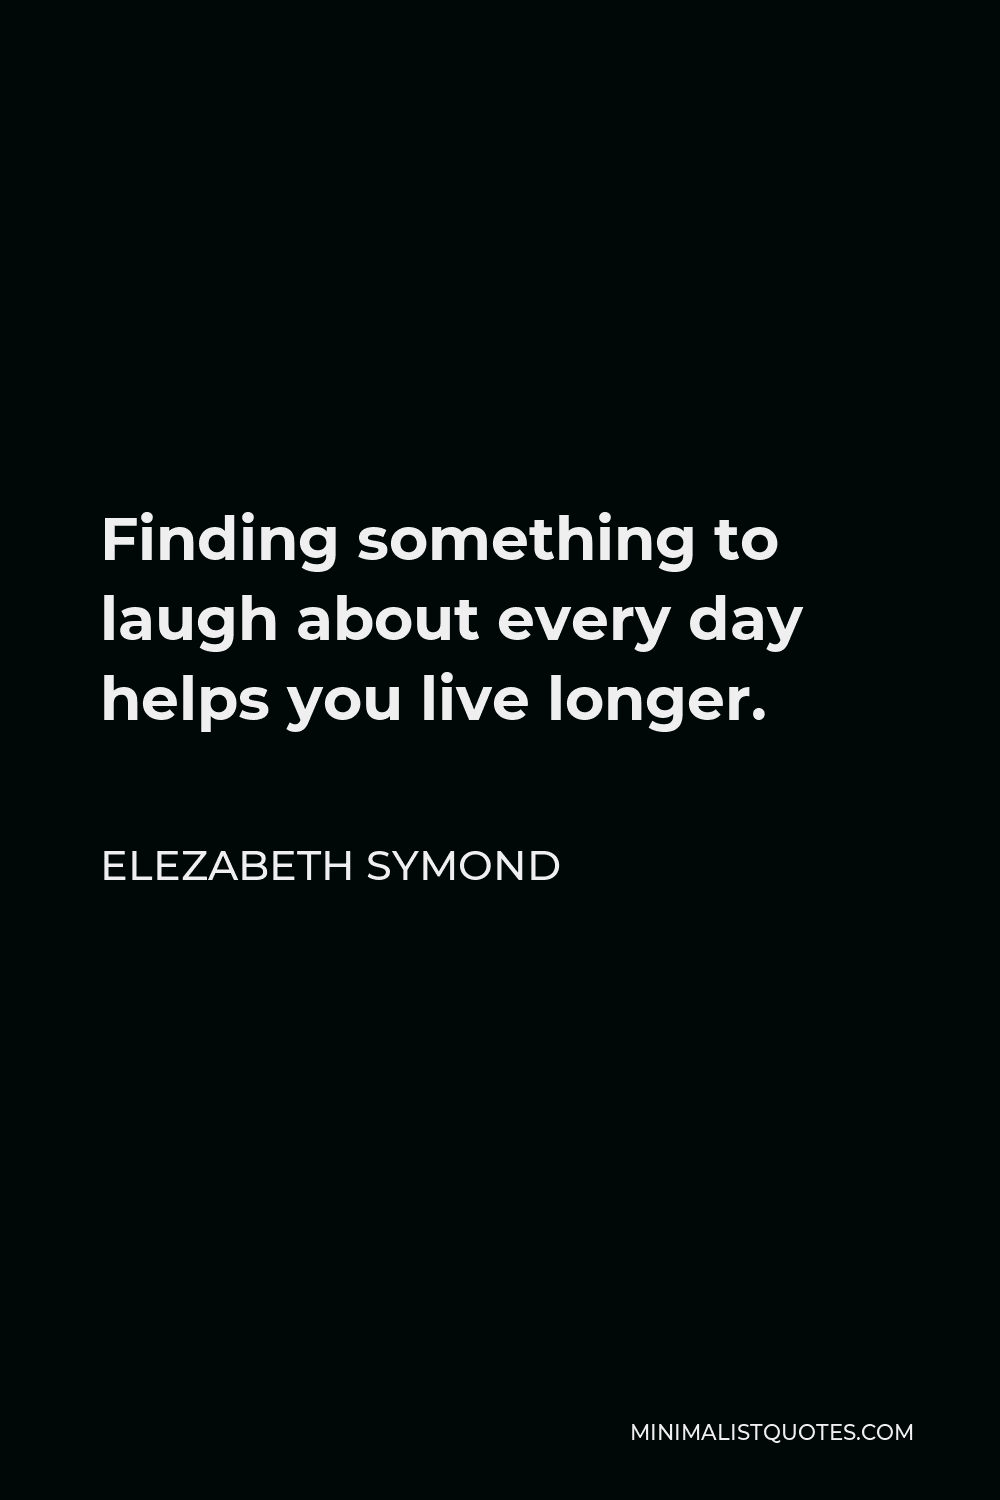 Elezabeth Symond Quote - Finding something to laugh about every day helps you live longer.